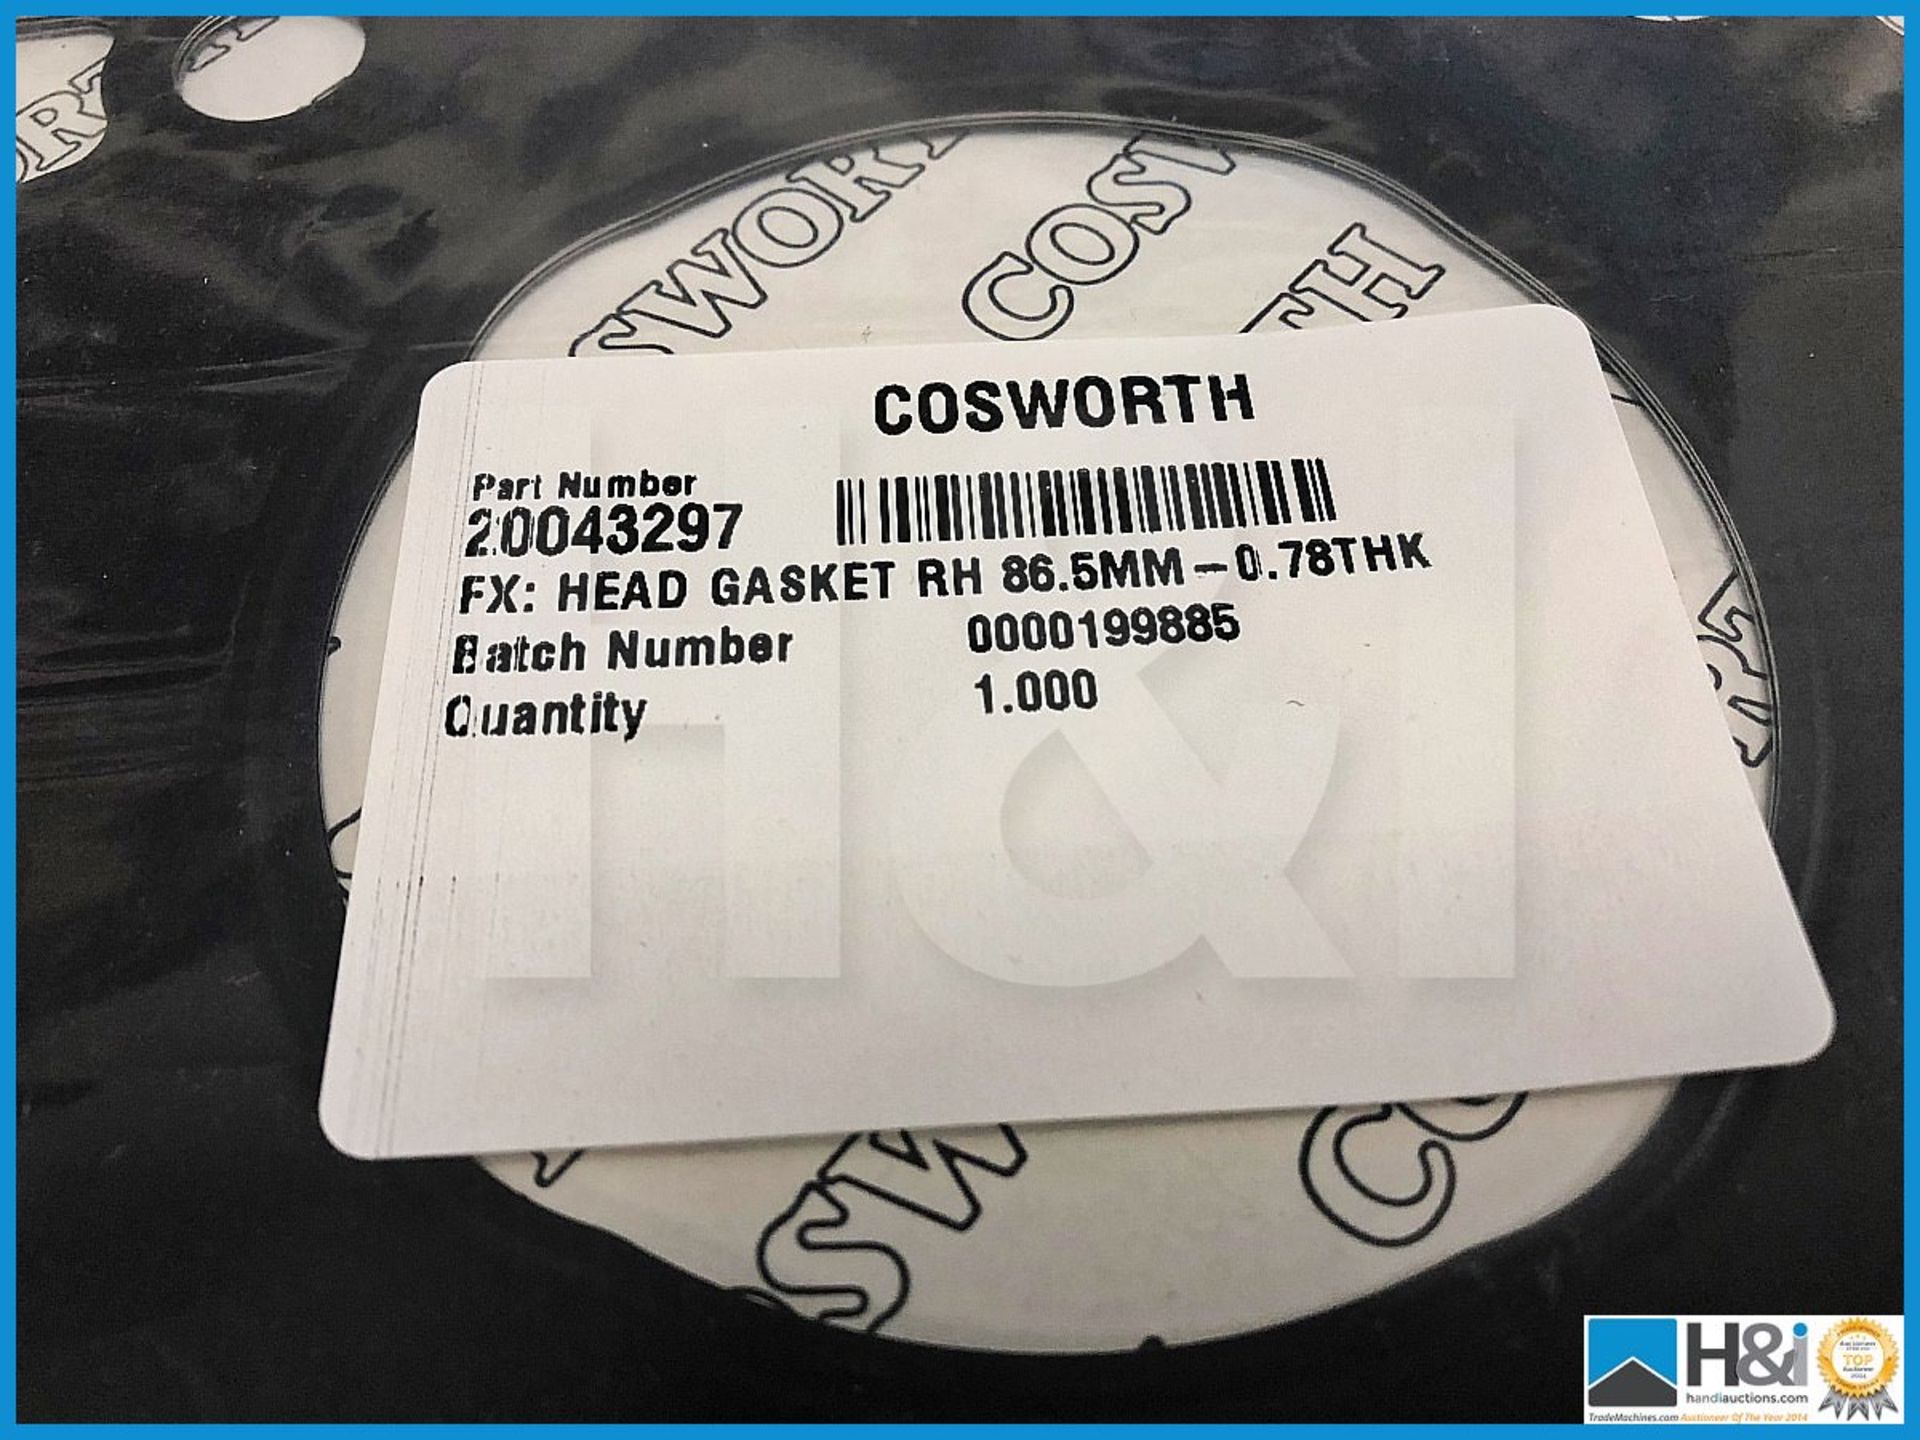 6 x Cosworth Toyota GT86 FX gasket RH 86.5mm - 0.78thk. Code: 20043297 - Image 2 of 2